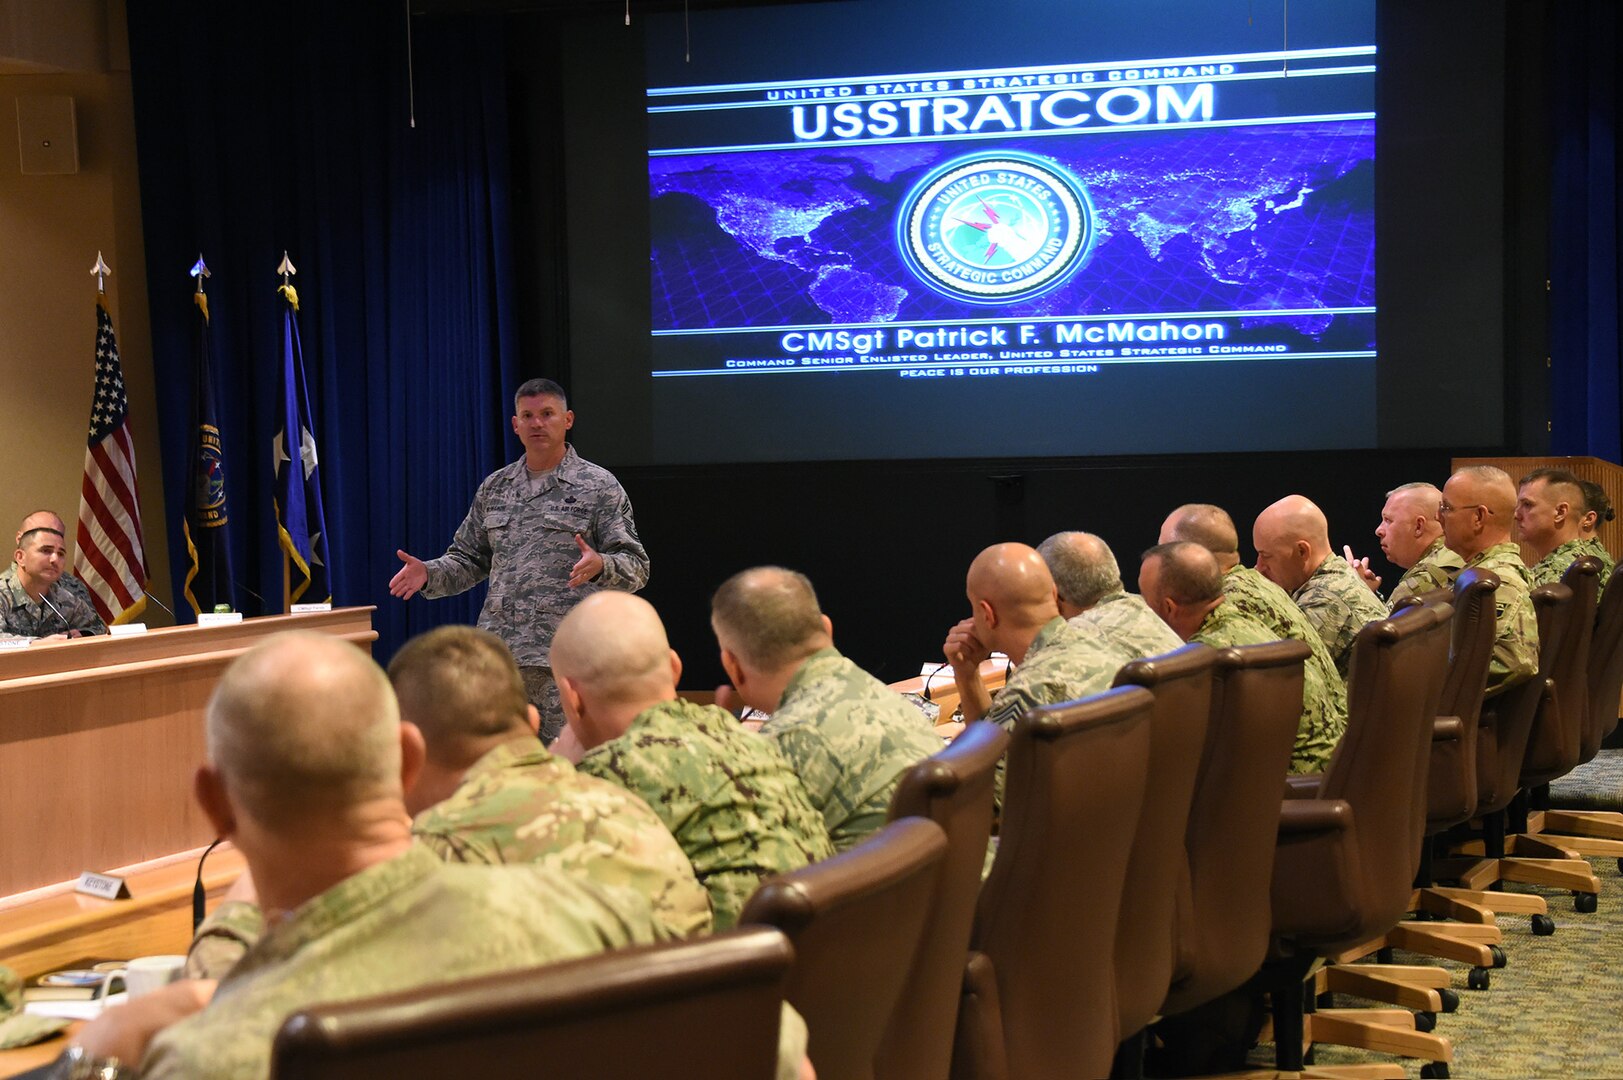 U.S. Air Force Chief Master Sgt. Patrick McMahon, senior enlisted leader of U.S. Strategic Command (USSTRATCOM), briefs Keystone 18-2 participants in the Dougherty Conference Center at Offutt Air Force Base, Neb., June 12, 2018. McMahon discussed USSTRATCOM’s missions and capabilities and the importance of mentoring the next generation of command senior enlisted leaders (CSELs). The Keystone course educates CSELs who currently, or will, serve in a general or flag officer-level headquarters. CSELs in the Keystone course visit combatant commands and receive briefings to understand their missions, roles, responsibilities and organizational structures. U.S. Strategic Command has global responsibilities assigned through the Unified Command Plan that include strategic deterrence, nuclear operations, space operations, joint electromagnetic spectrum operations, global strike, missile defense, and analysis and targeting.